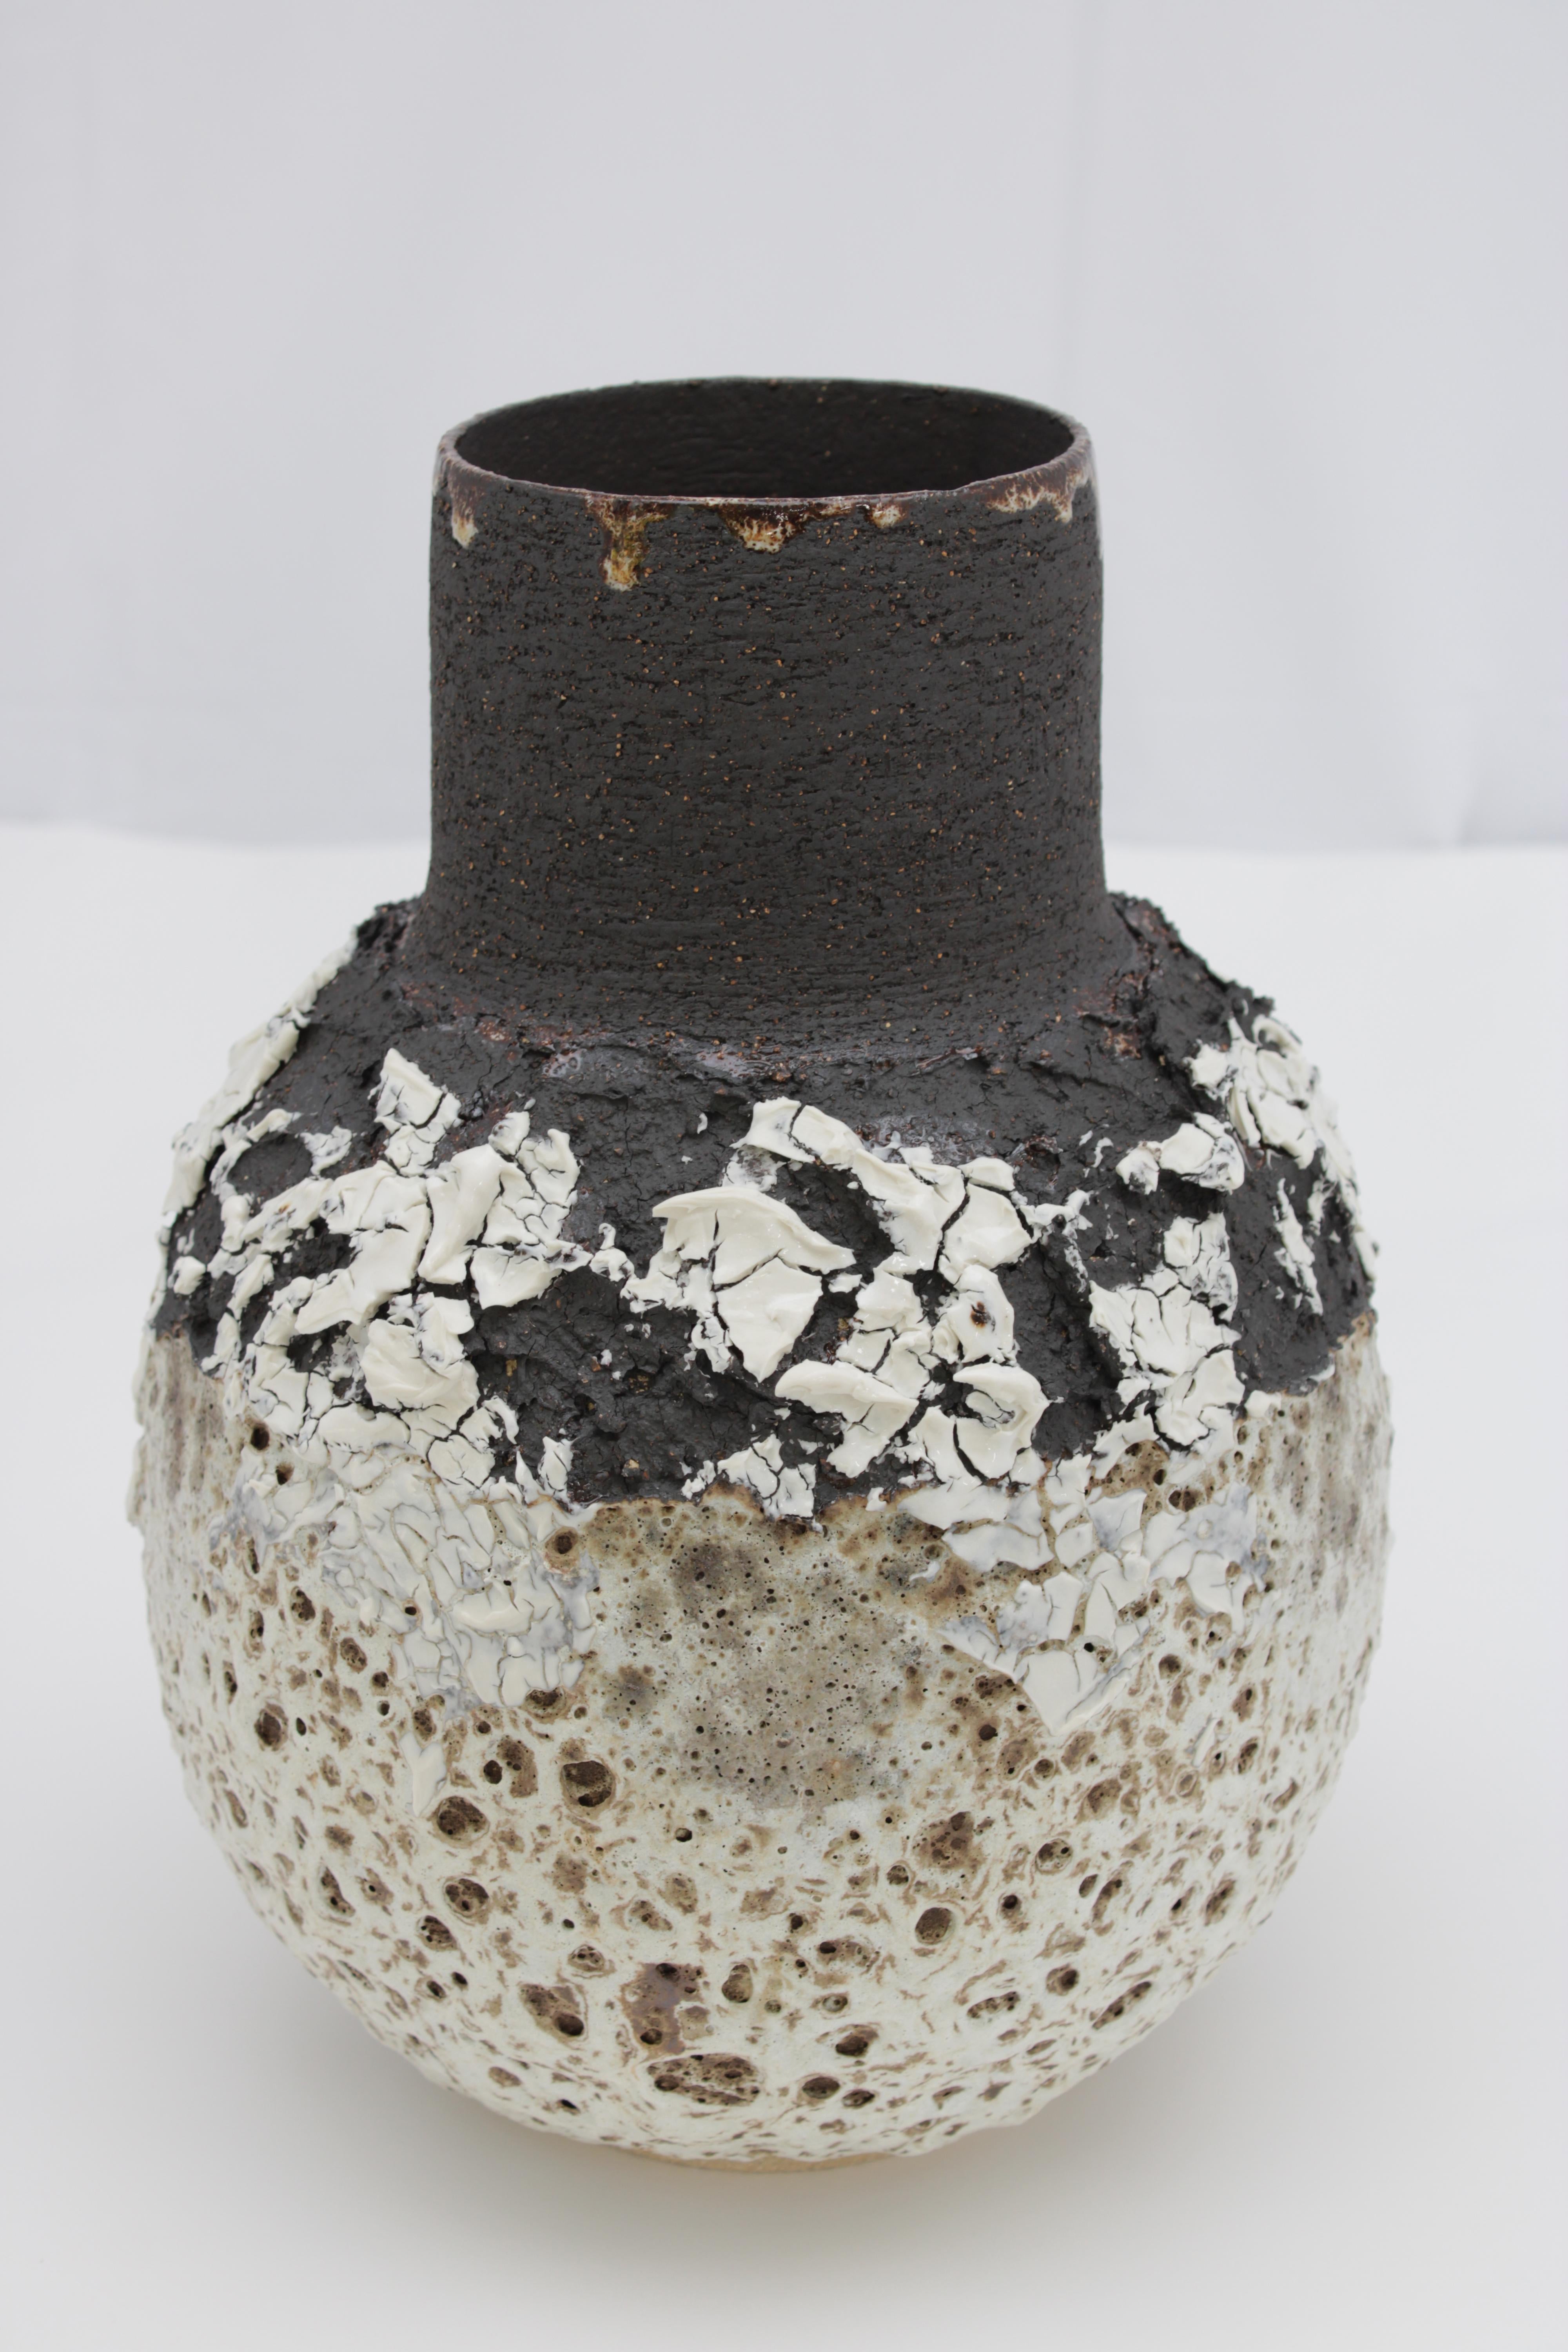 A large heavily textured volcanic vase with black, white and brown glaze and markings. Wide necked vessel with a bellied form. Made from black textured stoneware clay and porcelain.

Inspiration for the piece comes from the clay itself and the